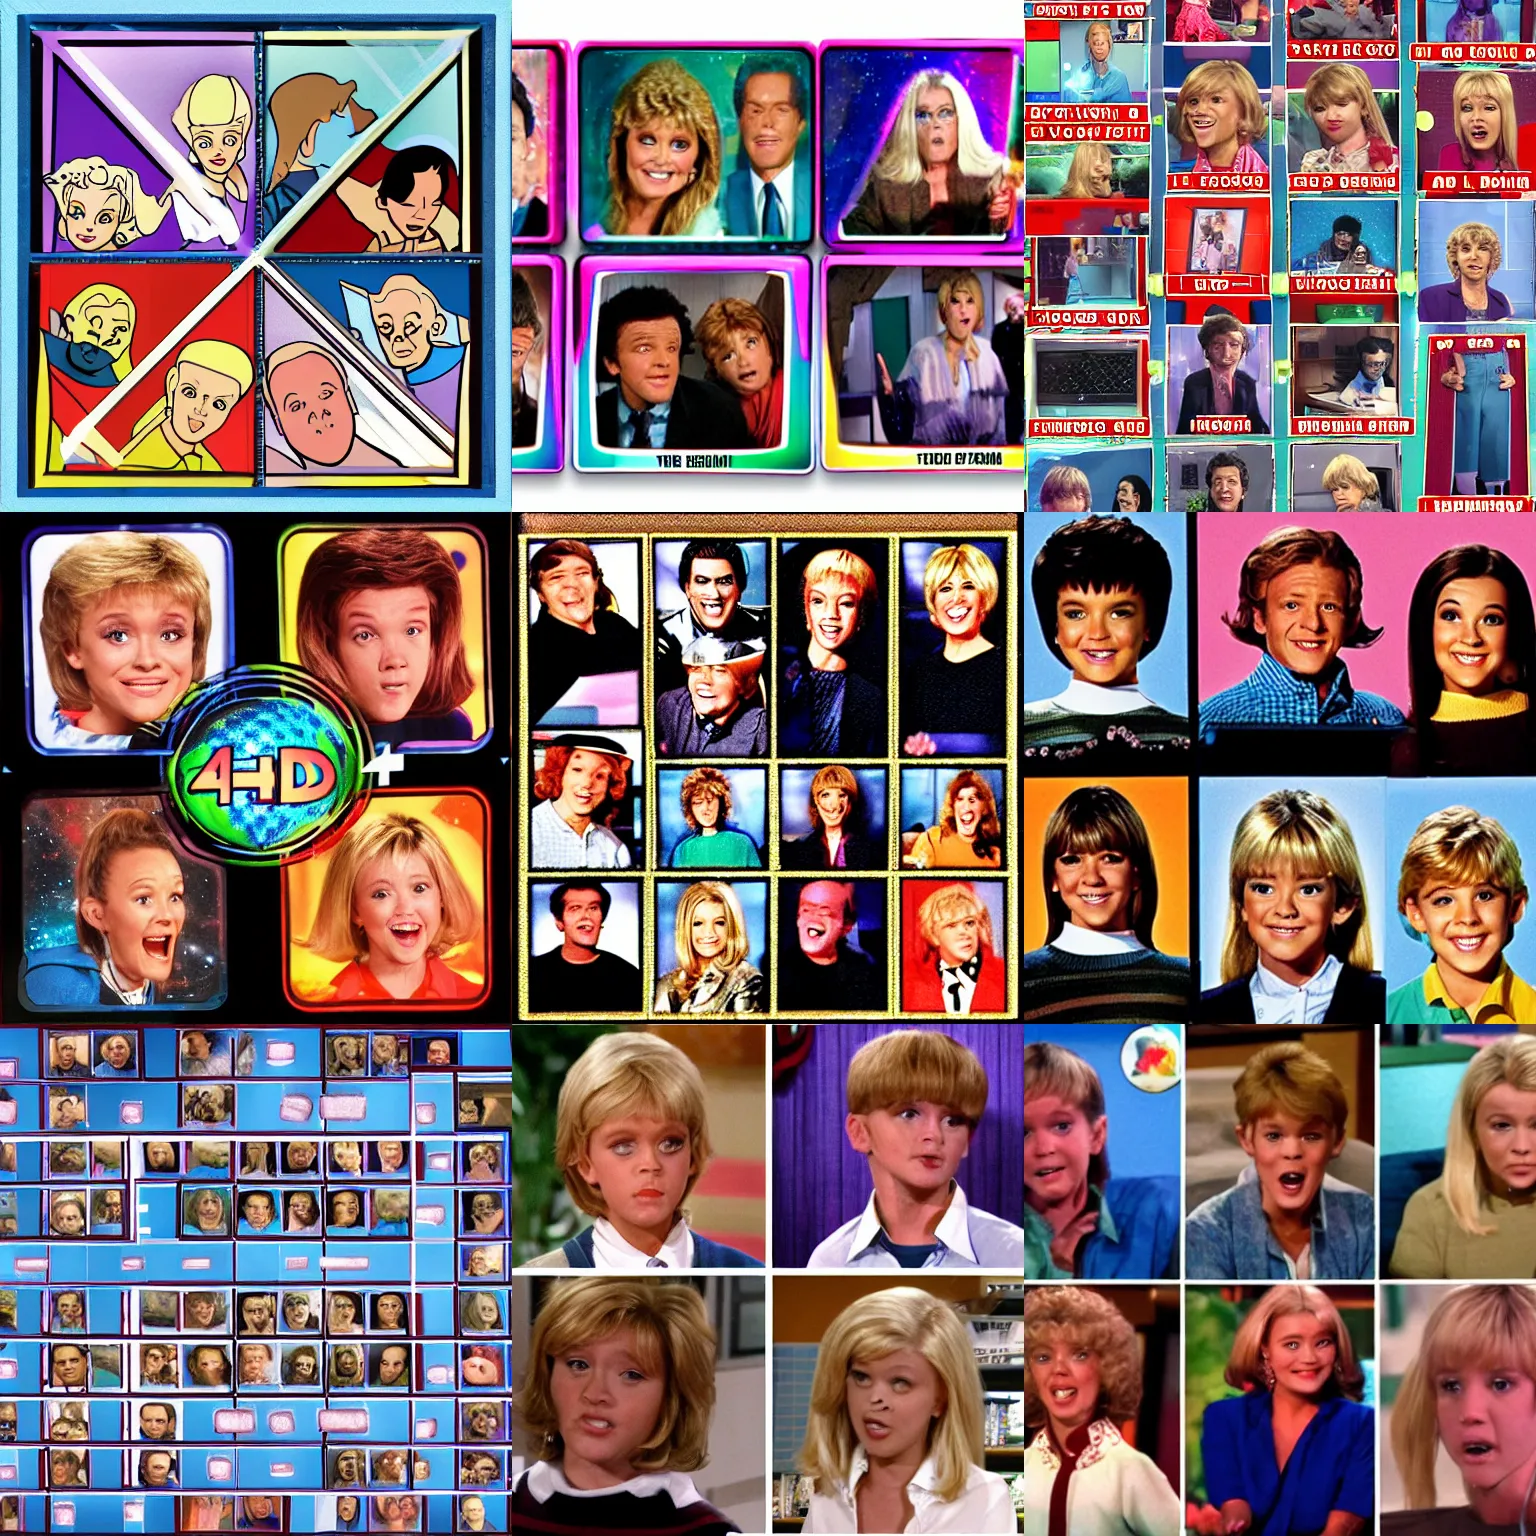 Prompt: <tv hd>Brady Bunch squares but with 4d multiverse aliens</tv>